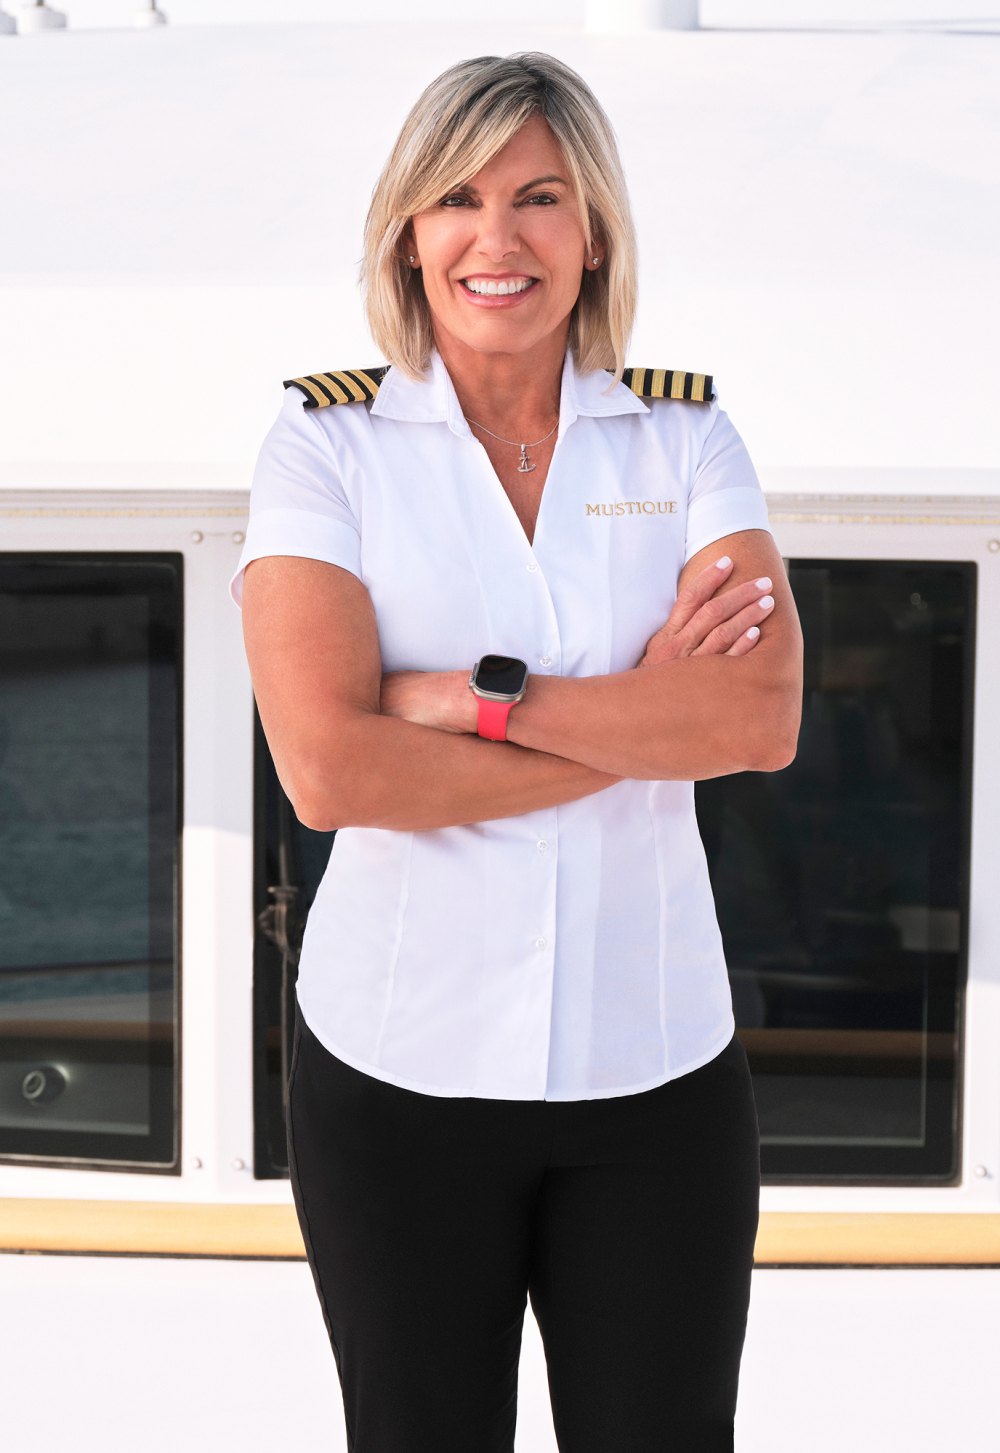 Below Deck in the Mediterranean Captain Sandy Questions The Boss Who Doesn't Raise The Team